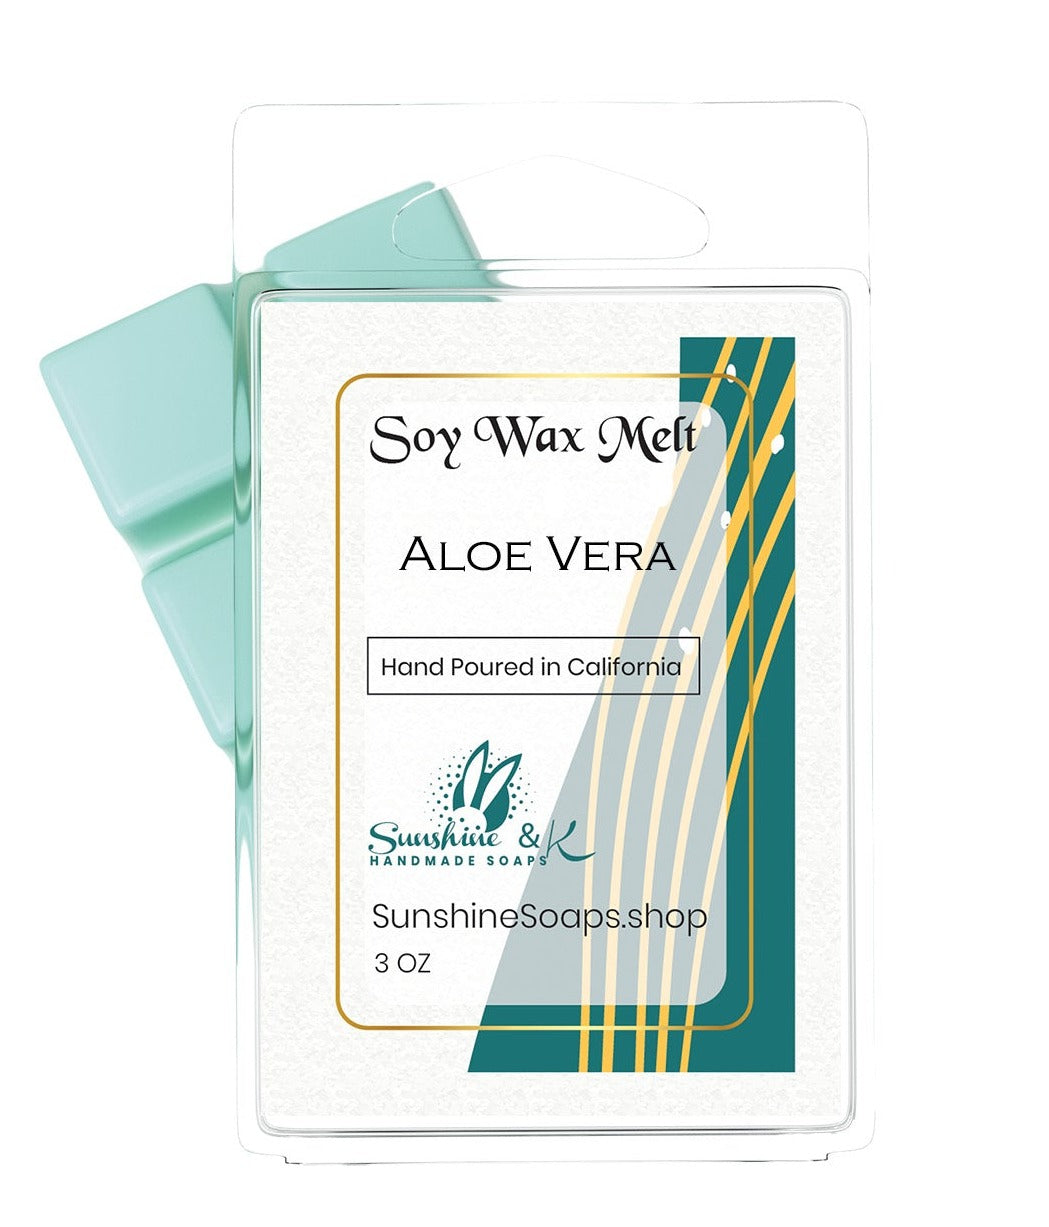 Highly-scented Vegan 100% Soy Wax Melt – American Grown Soy Wax melt – Clamshell – 3 OZ